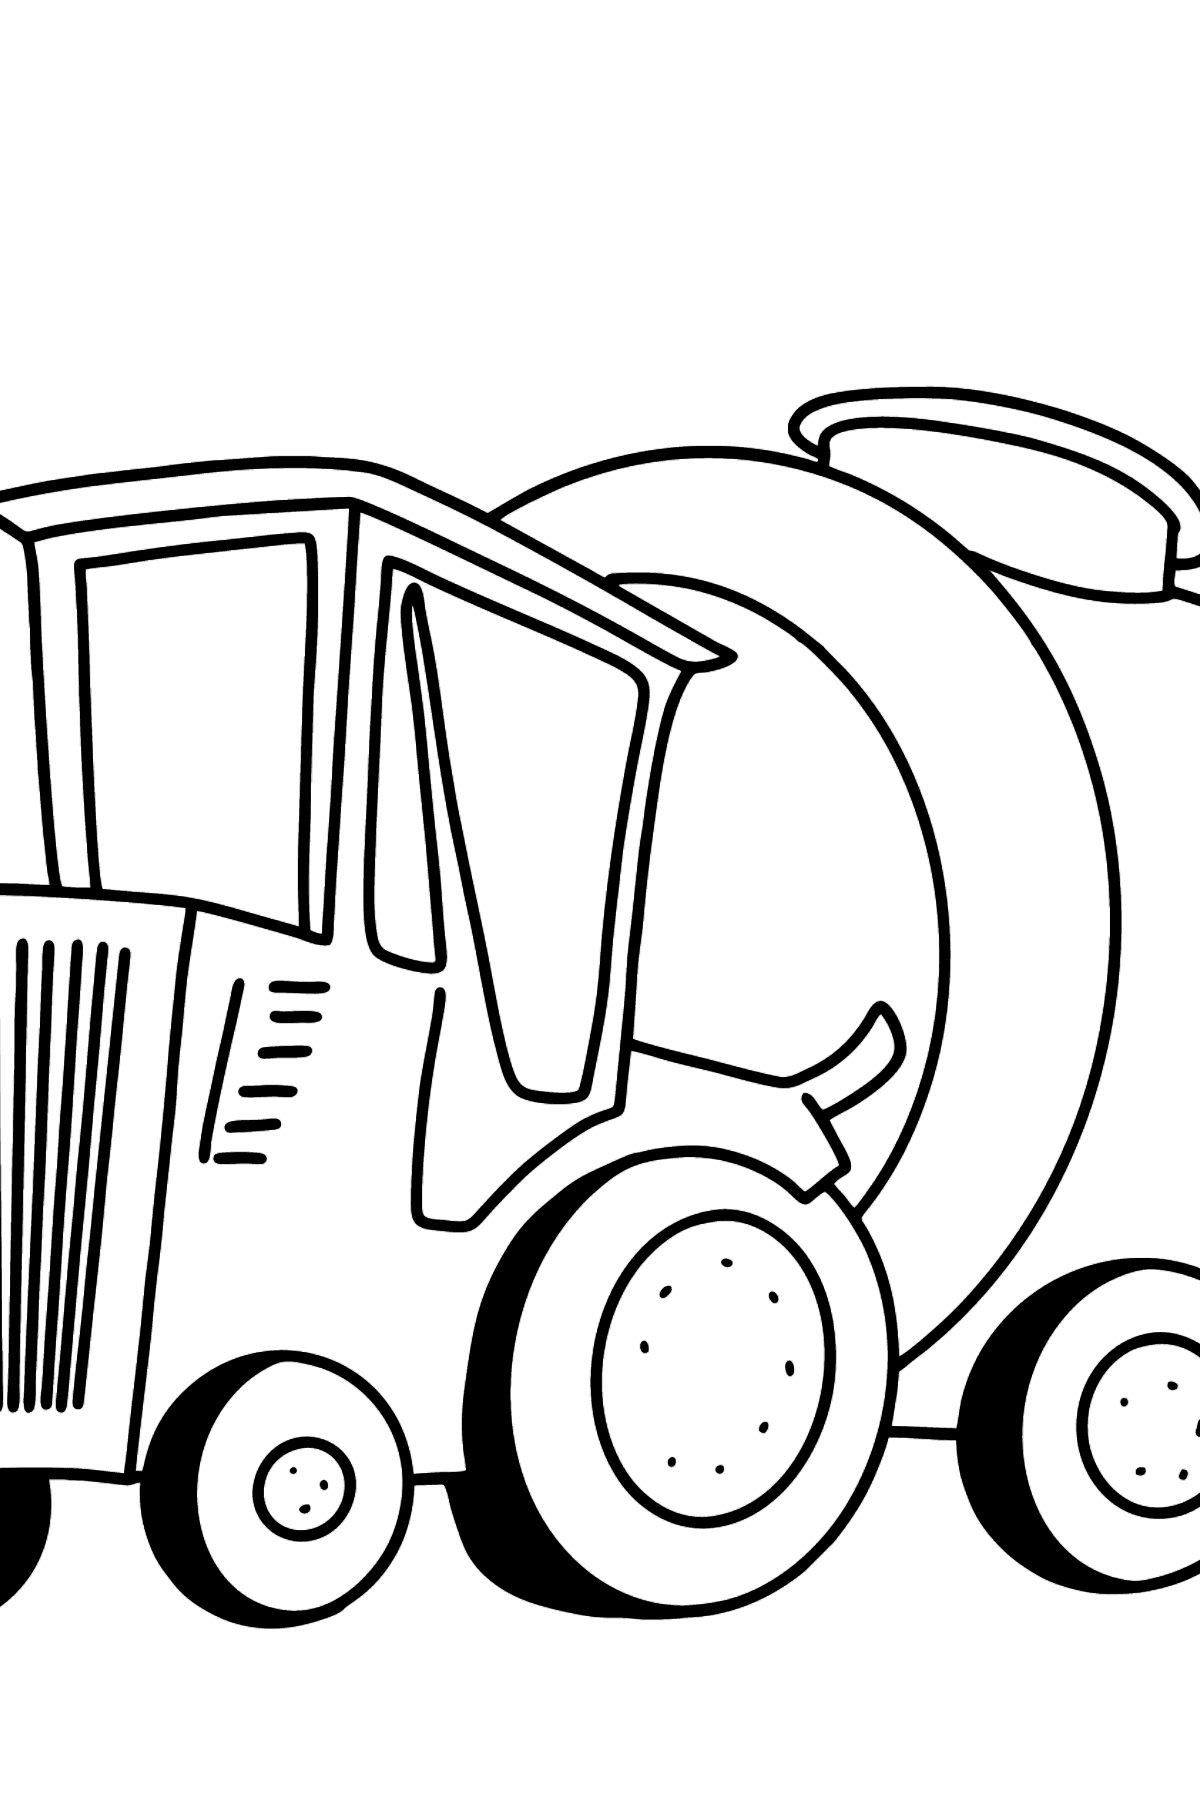 Tractor with Water Trailer coloring page - Coloring Pages for Kids